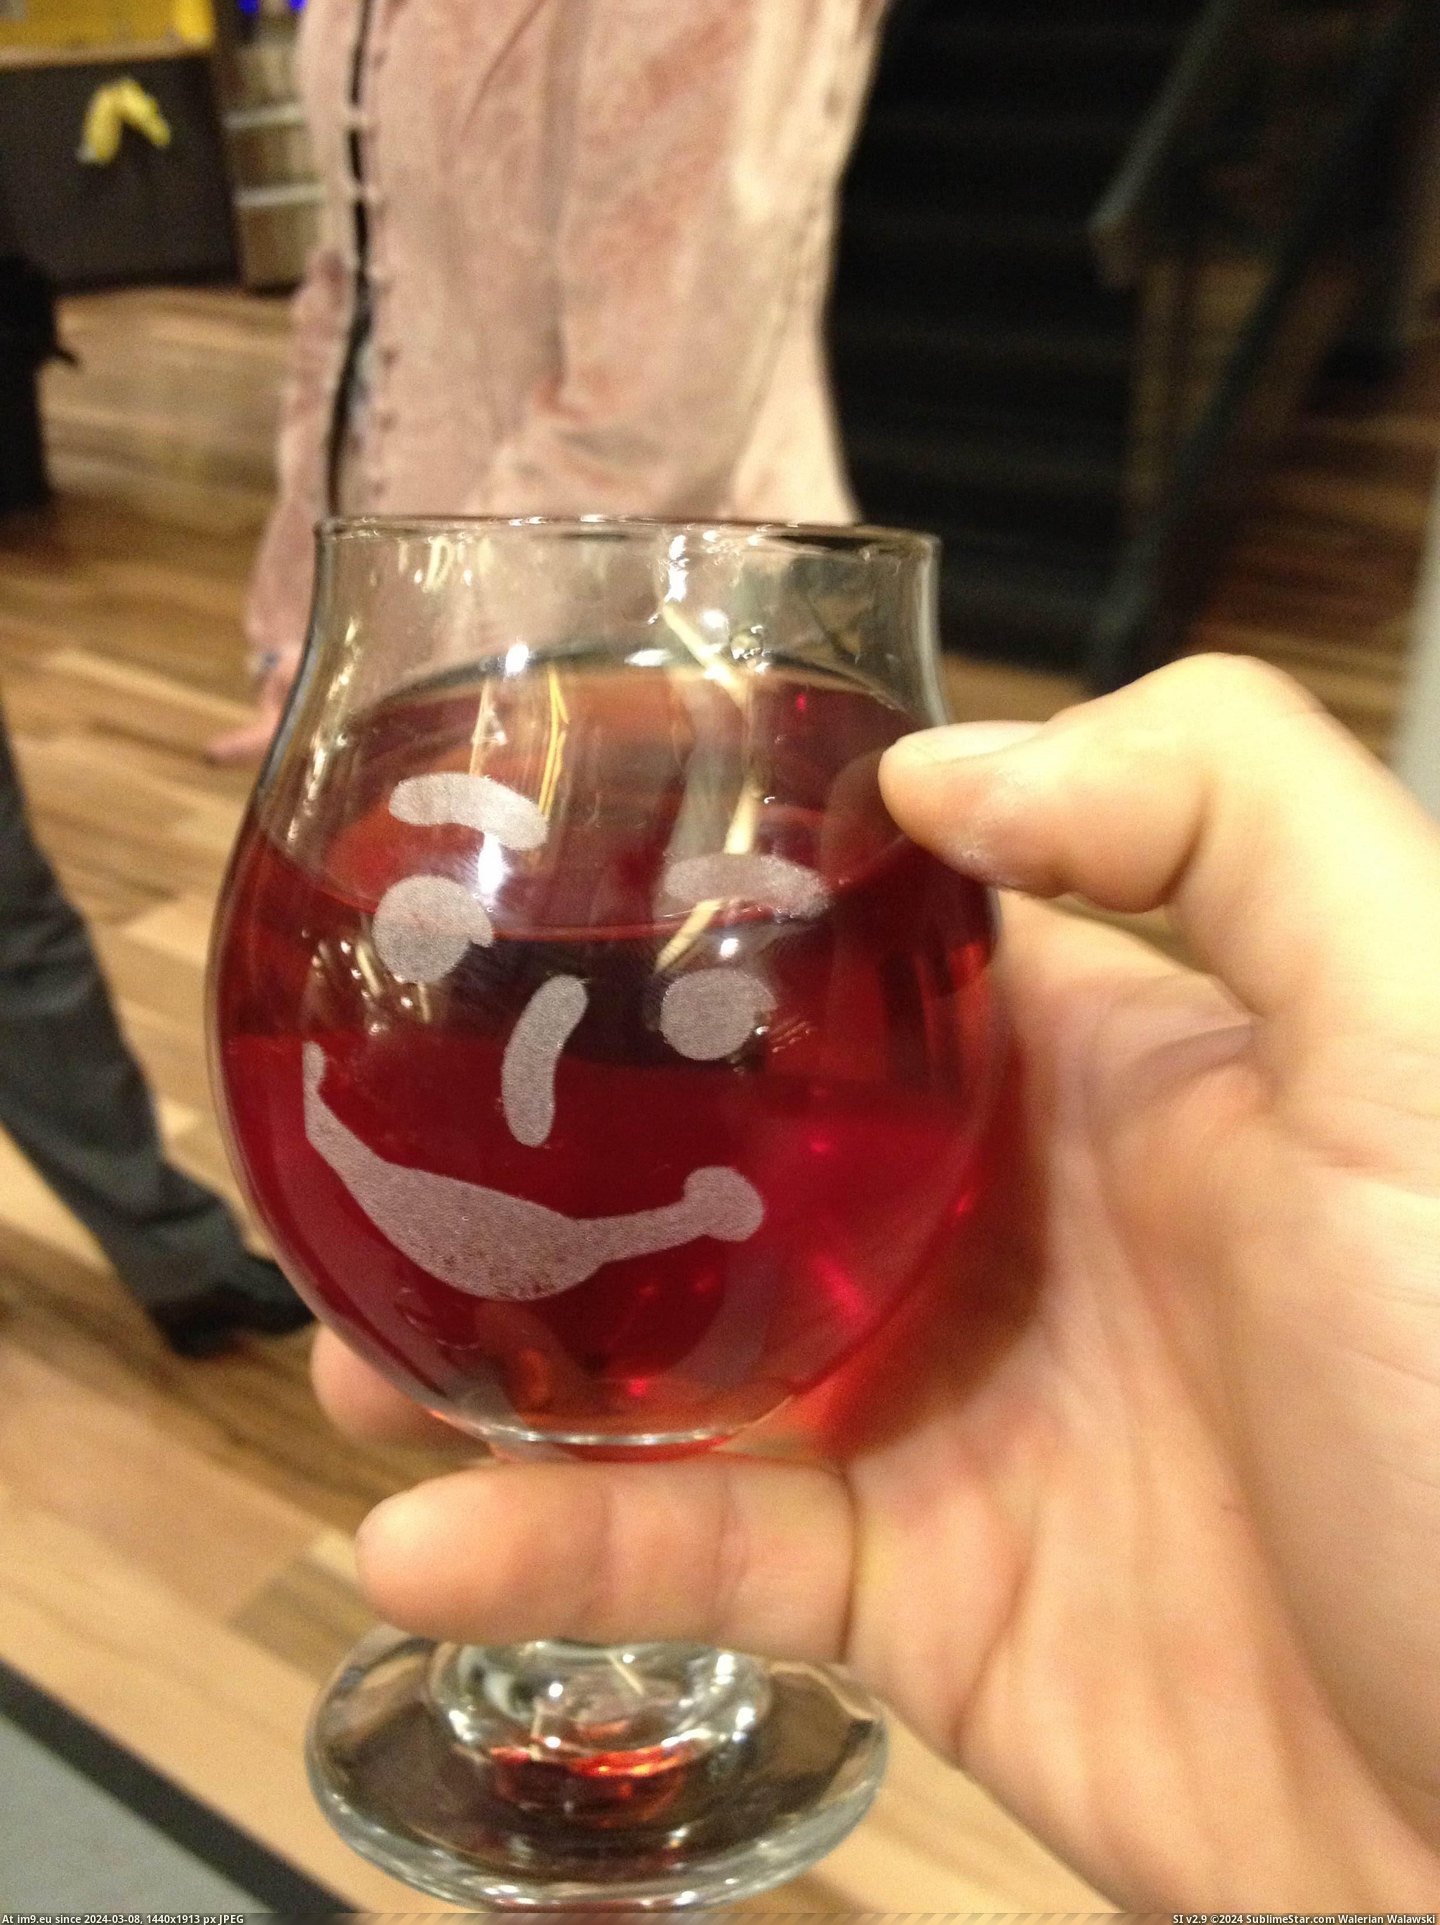 #Funny #Work #Night #Glasses #Laser #Etched #Had #Party #Yeah [Funny] Had a party at work last night where we laser-etched glasses. Here's mine, oh yeah! Pic. (Изображение из альбом My r/FUNNY favs))